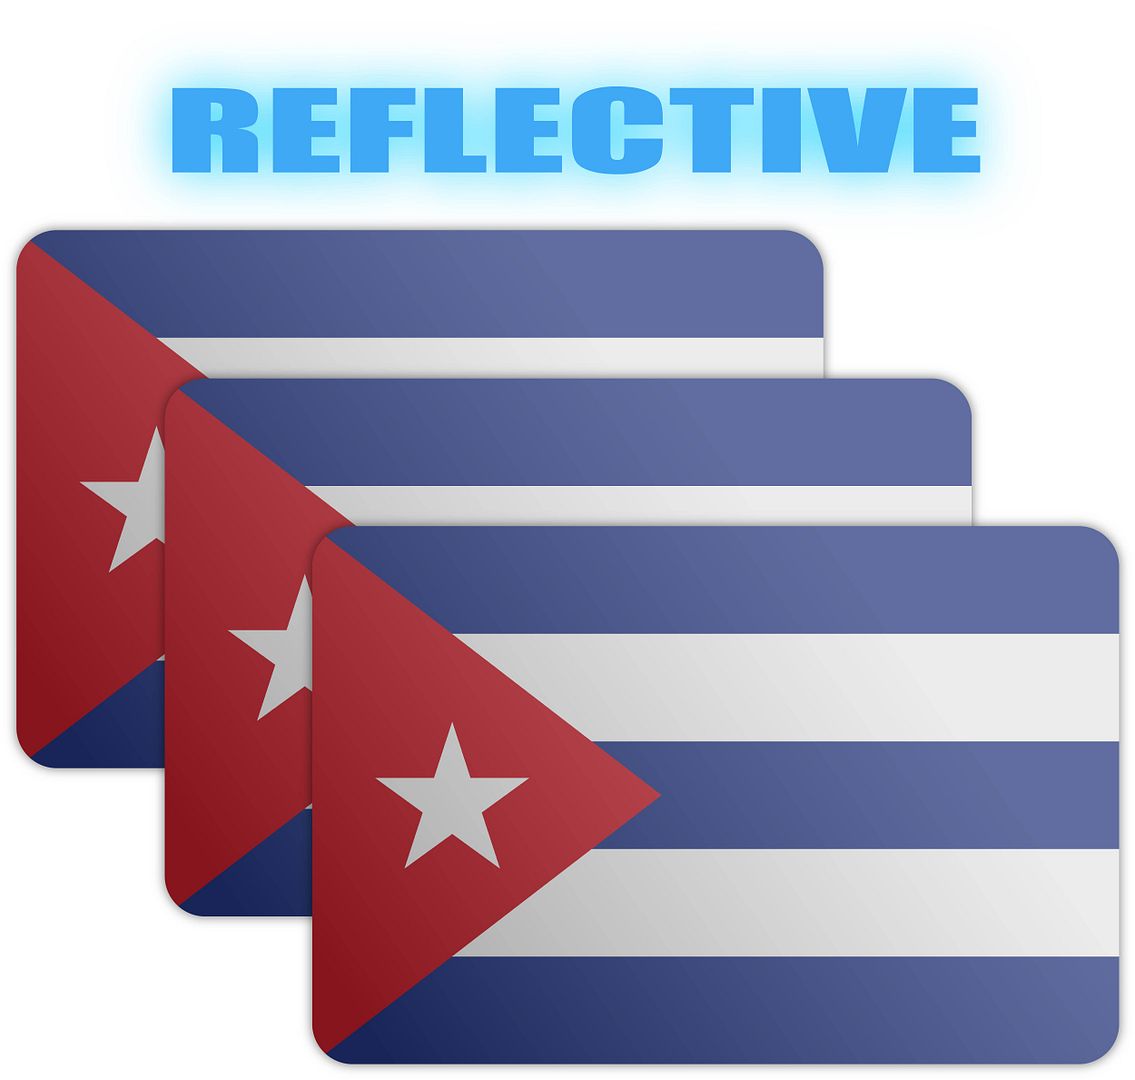 (x3) 3M Reflective Cuba Flag Stickers | Versatile & High Quality Safety Decals | Flag of Cuba Sticker Decals | Perfect for Hard hats, laptops, bikes, toolboxes and more! - image 1 of 3